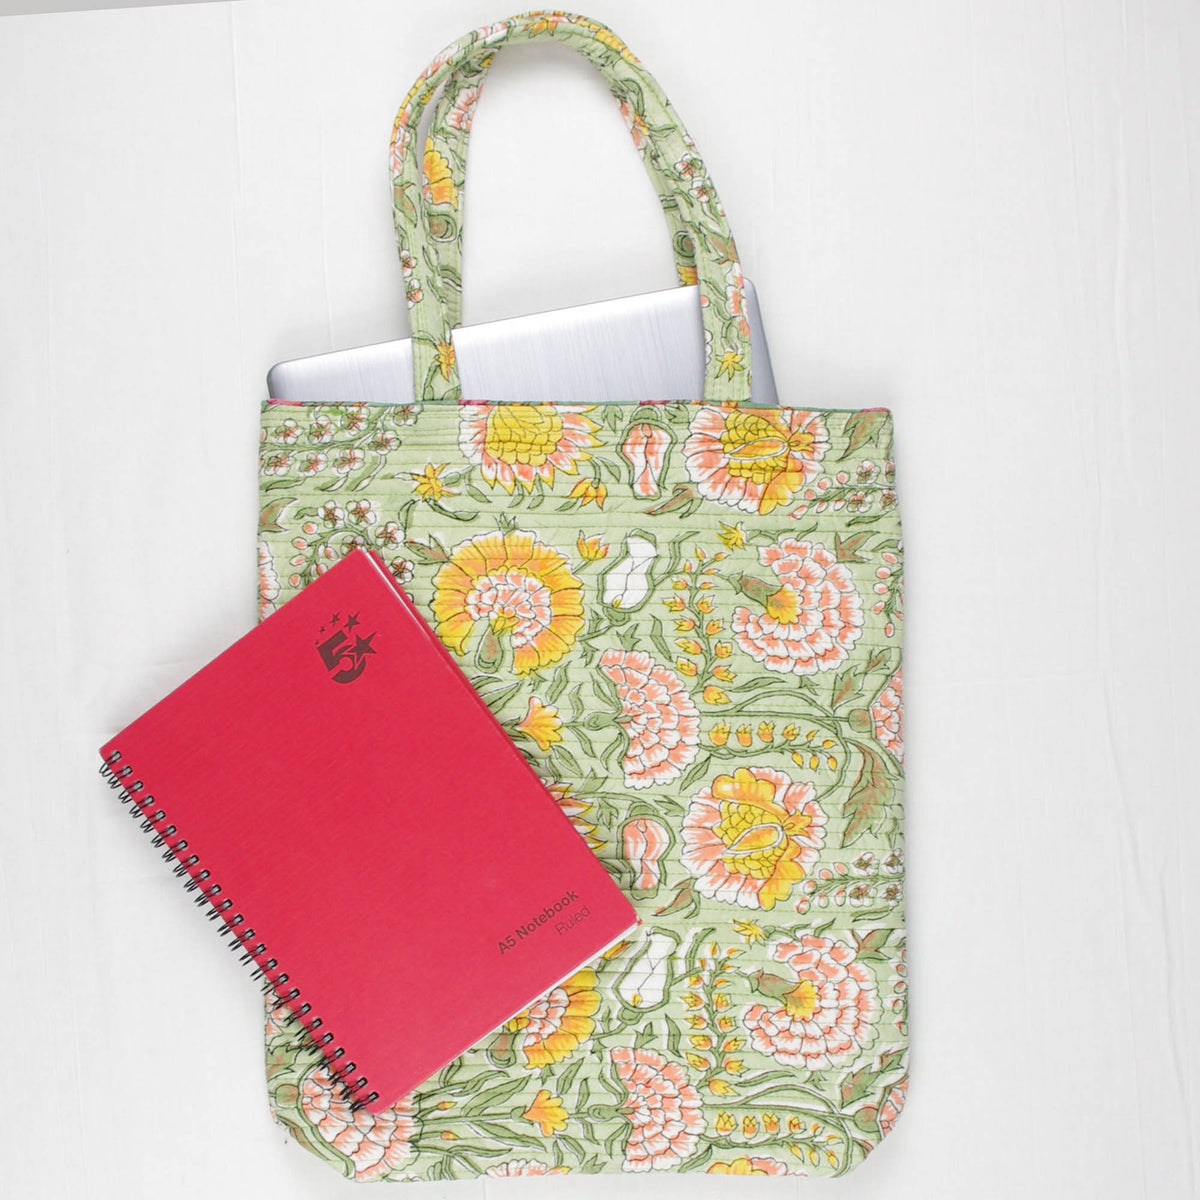 Cotton Quilted Hand Block Print Tote Bag - Marigold Floral On Pista Green